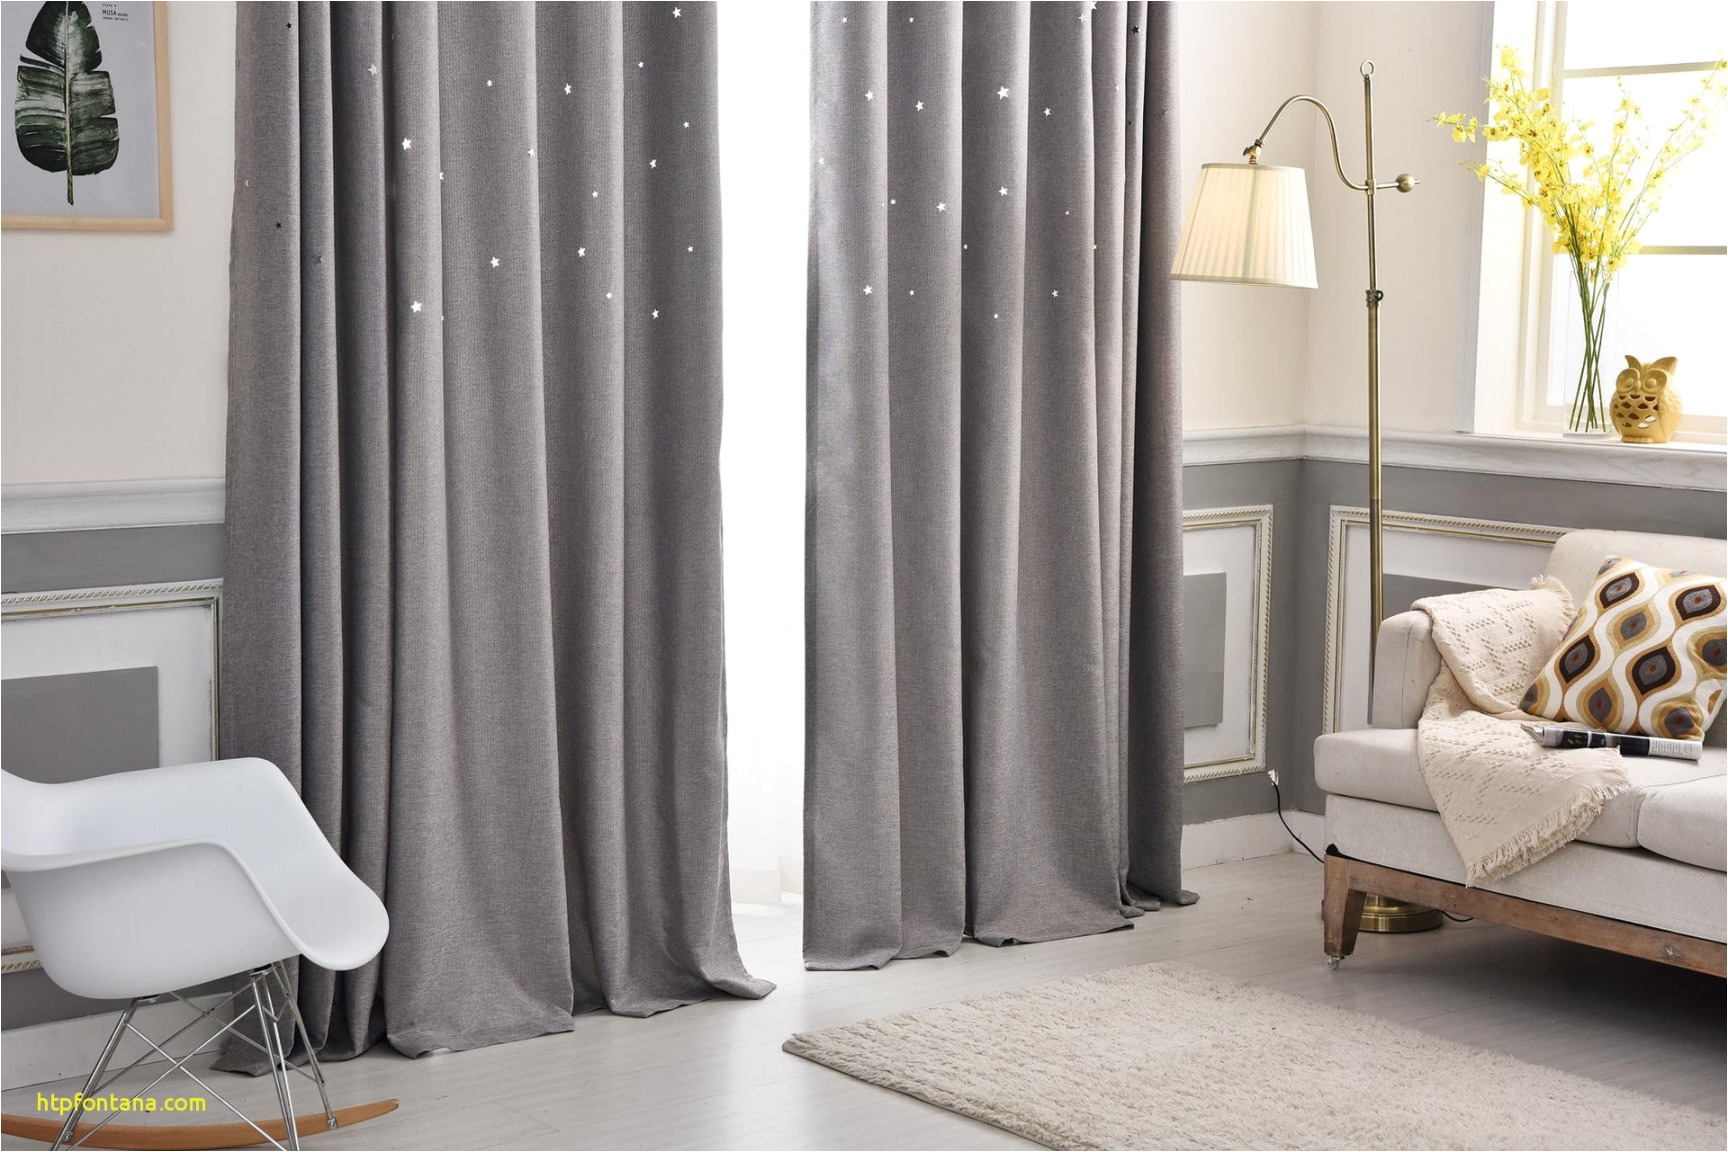 Living Room Design 2018 Awesome Furniture Automatic Curtains Best Used 2018 Subaru Outback 2 0d Curtain